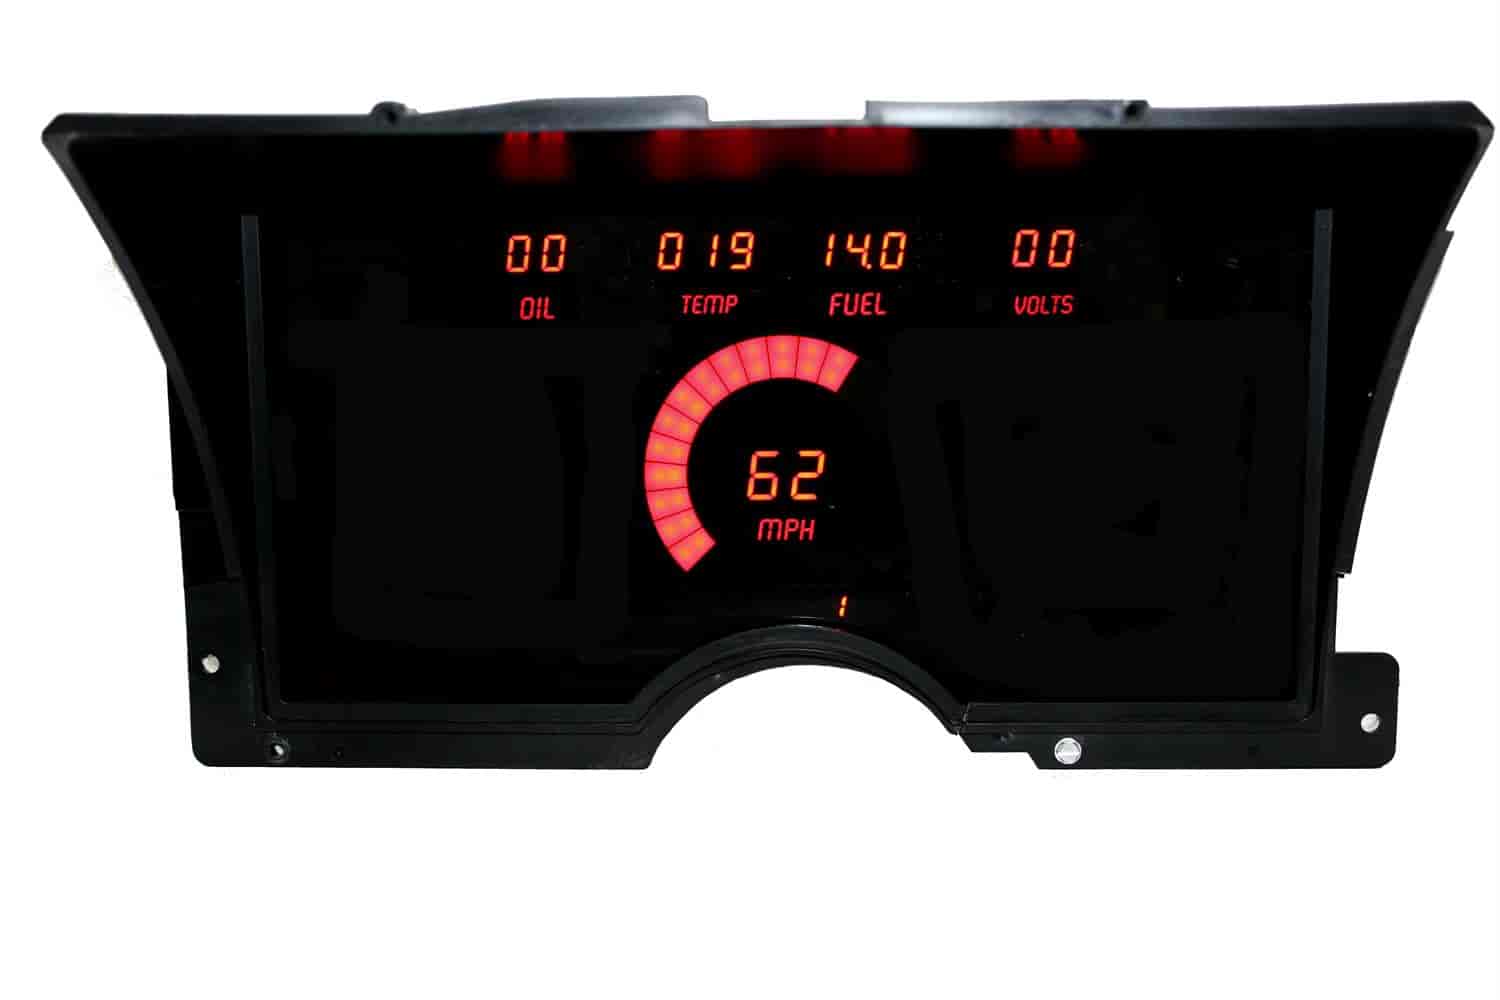 LED Direct Replacement Digital Bargraph Dash Kits for 1992-1994 Chevy Truck [Red]